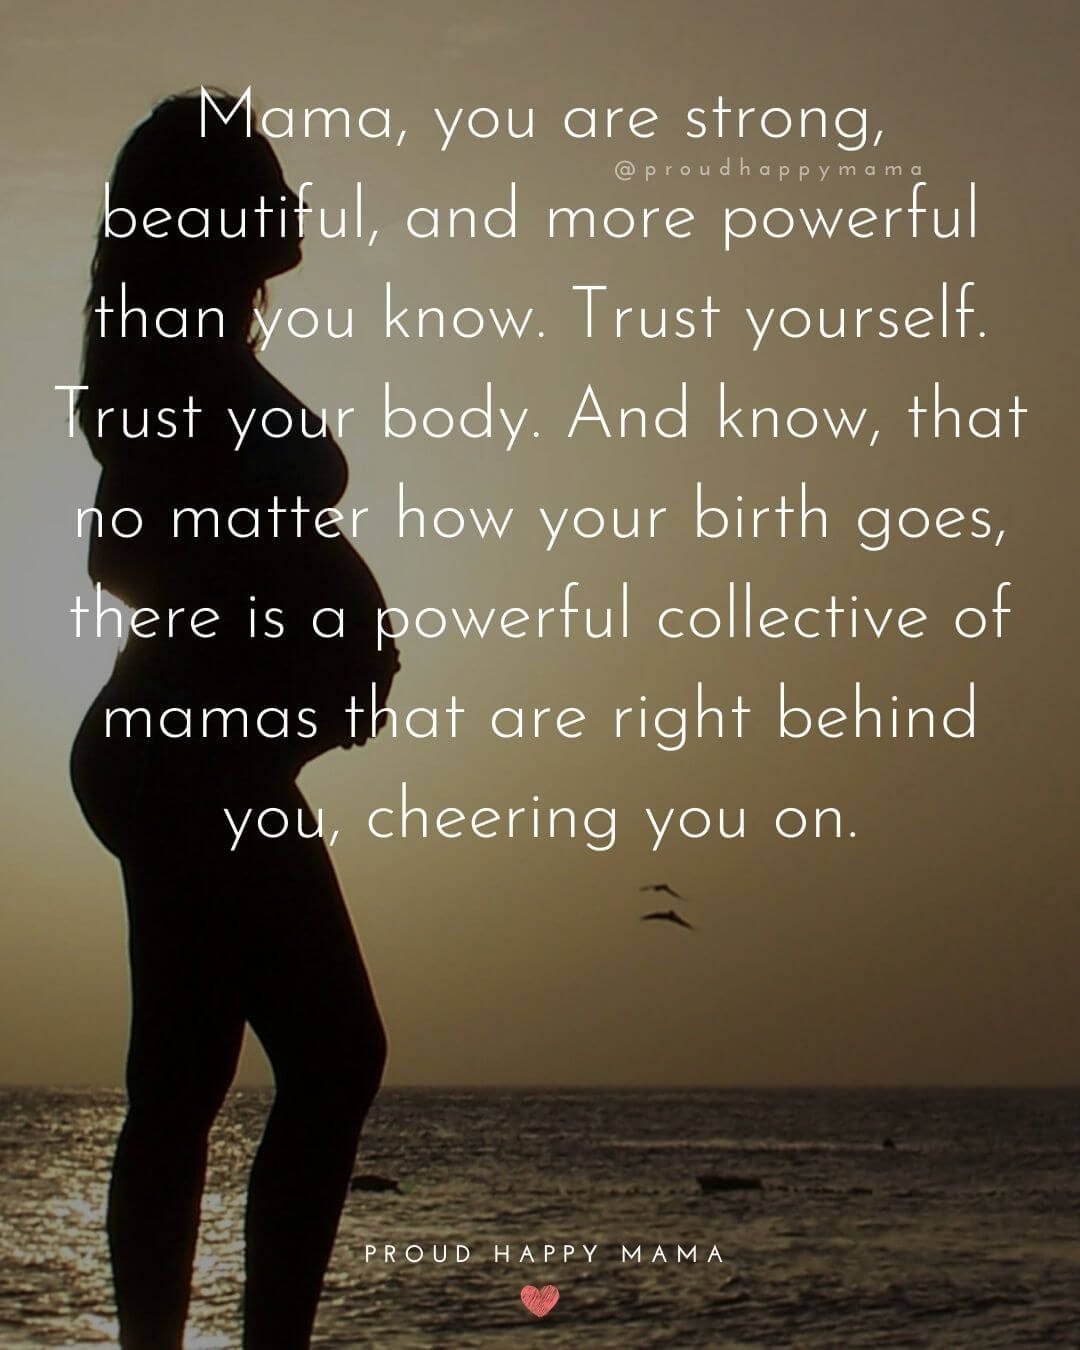 70+ Inspirational Pregnancy Quotes for Expecting Mothers